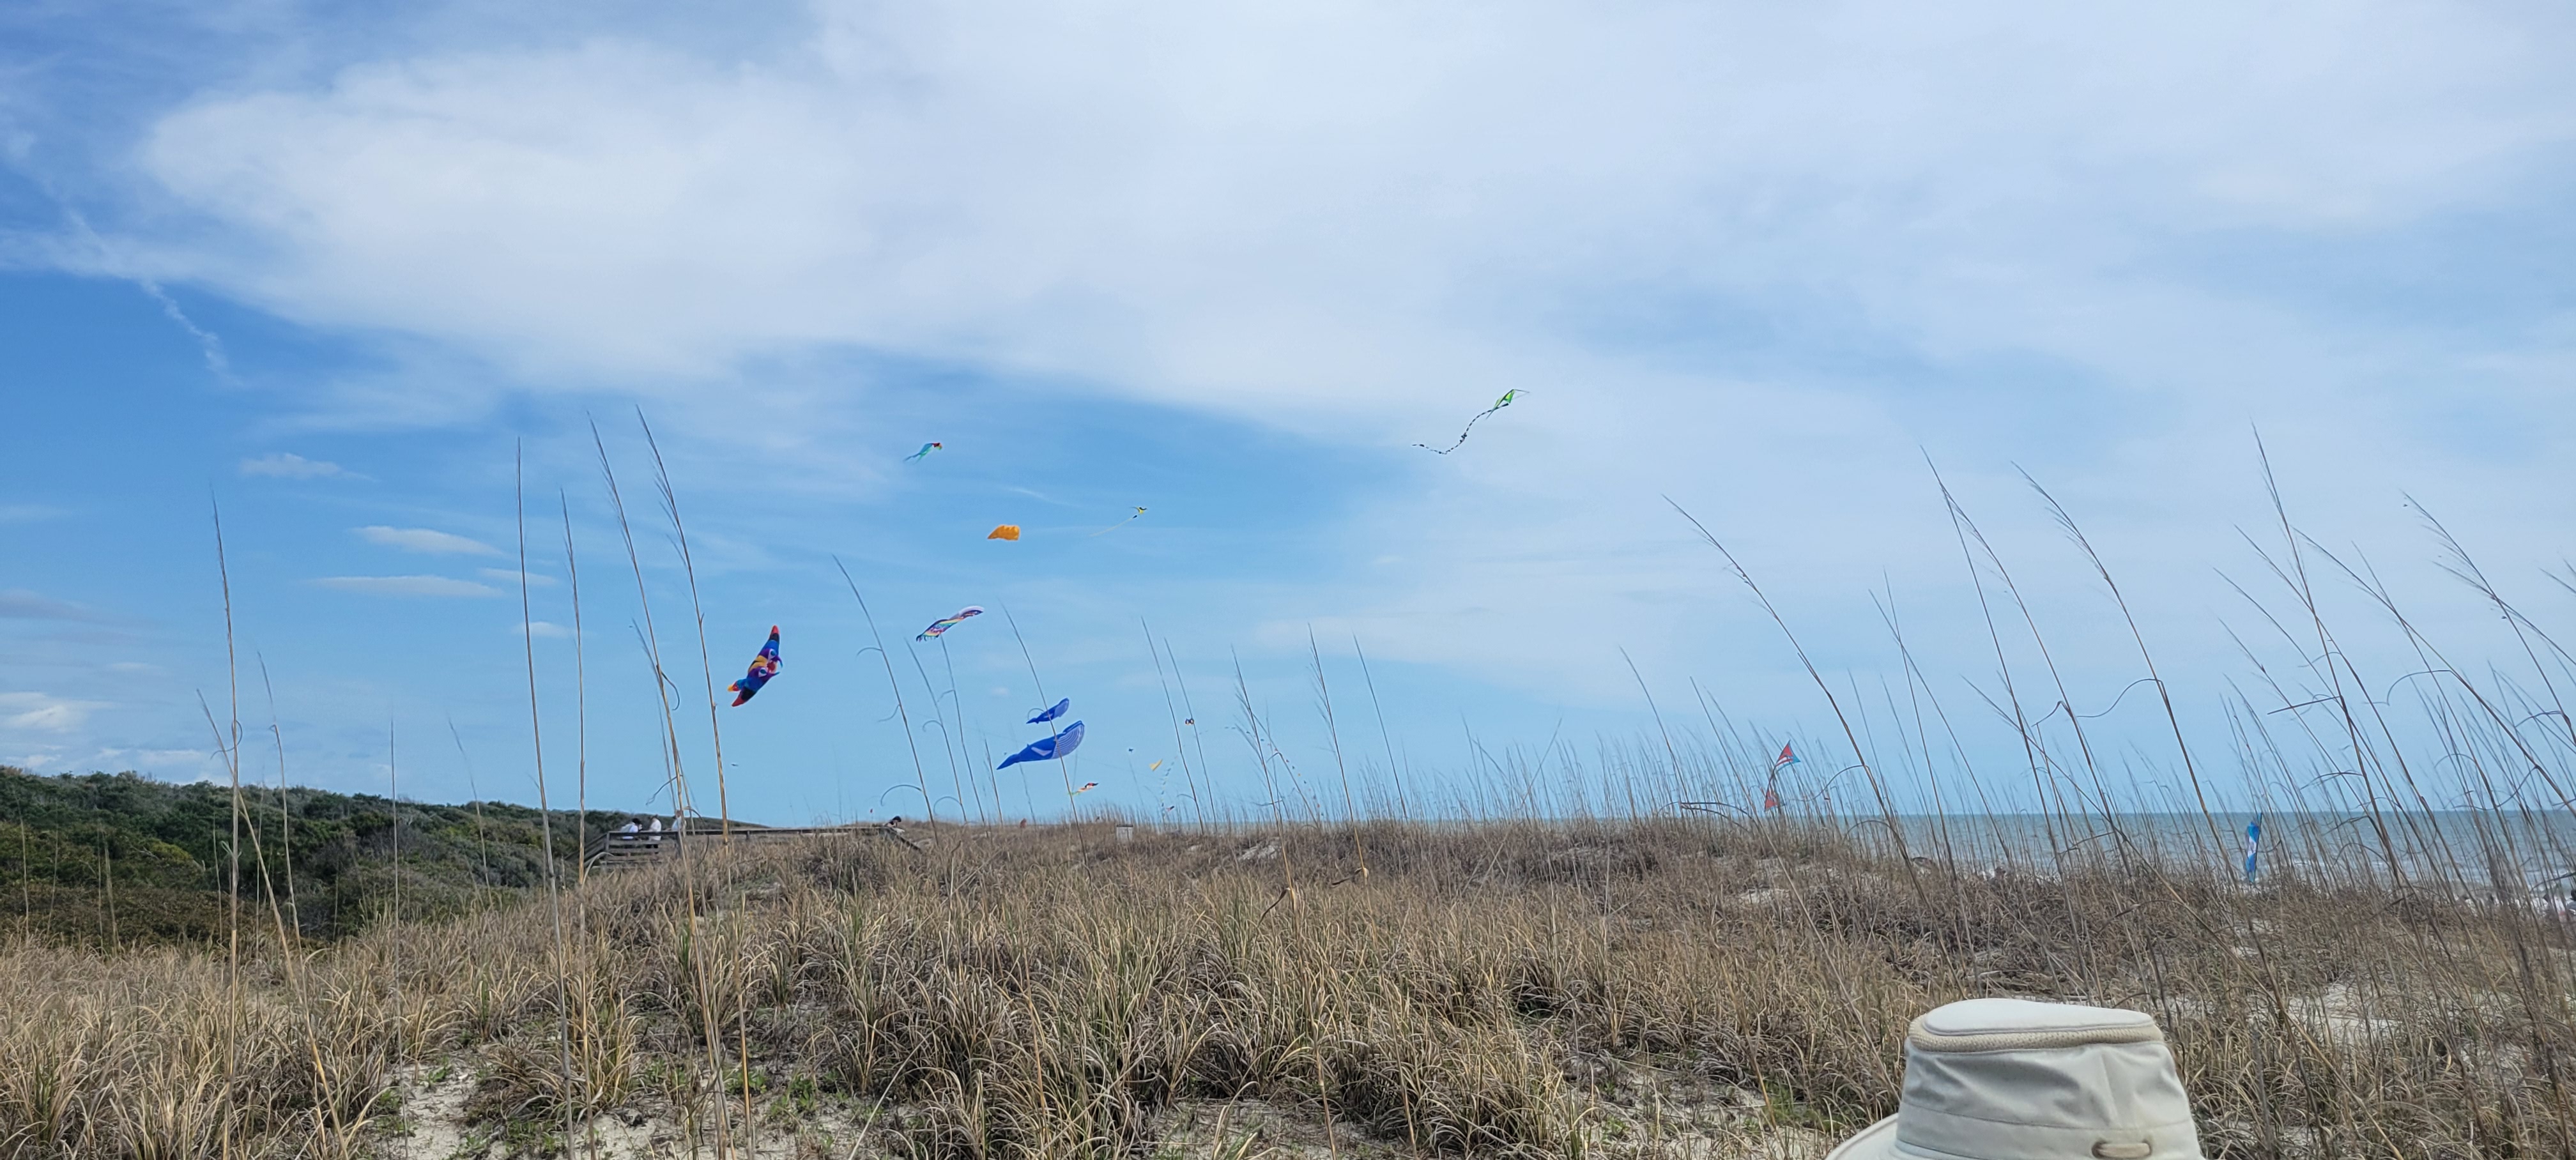 kites flying at the beach